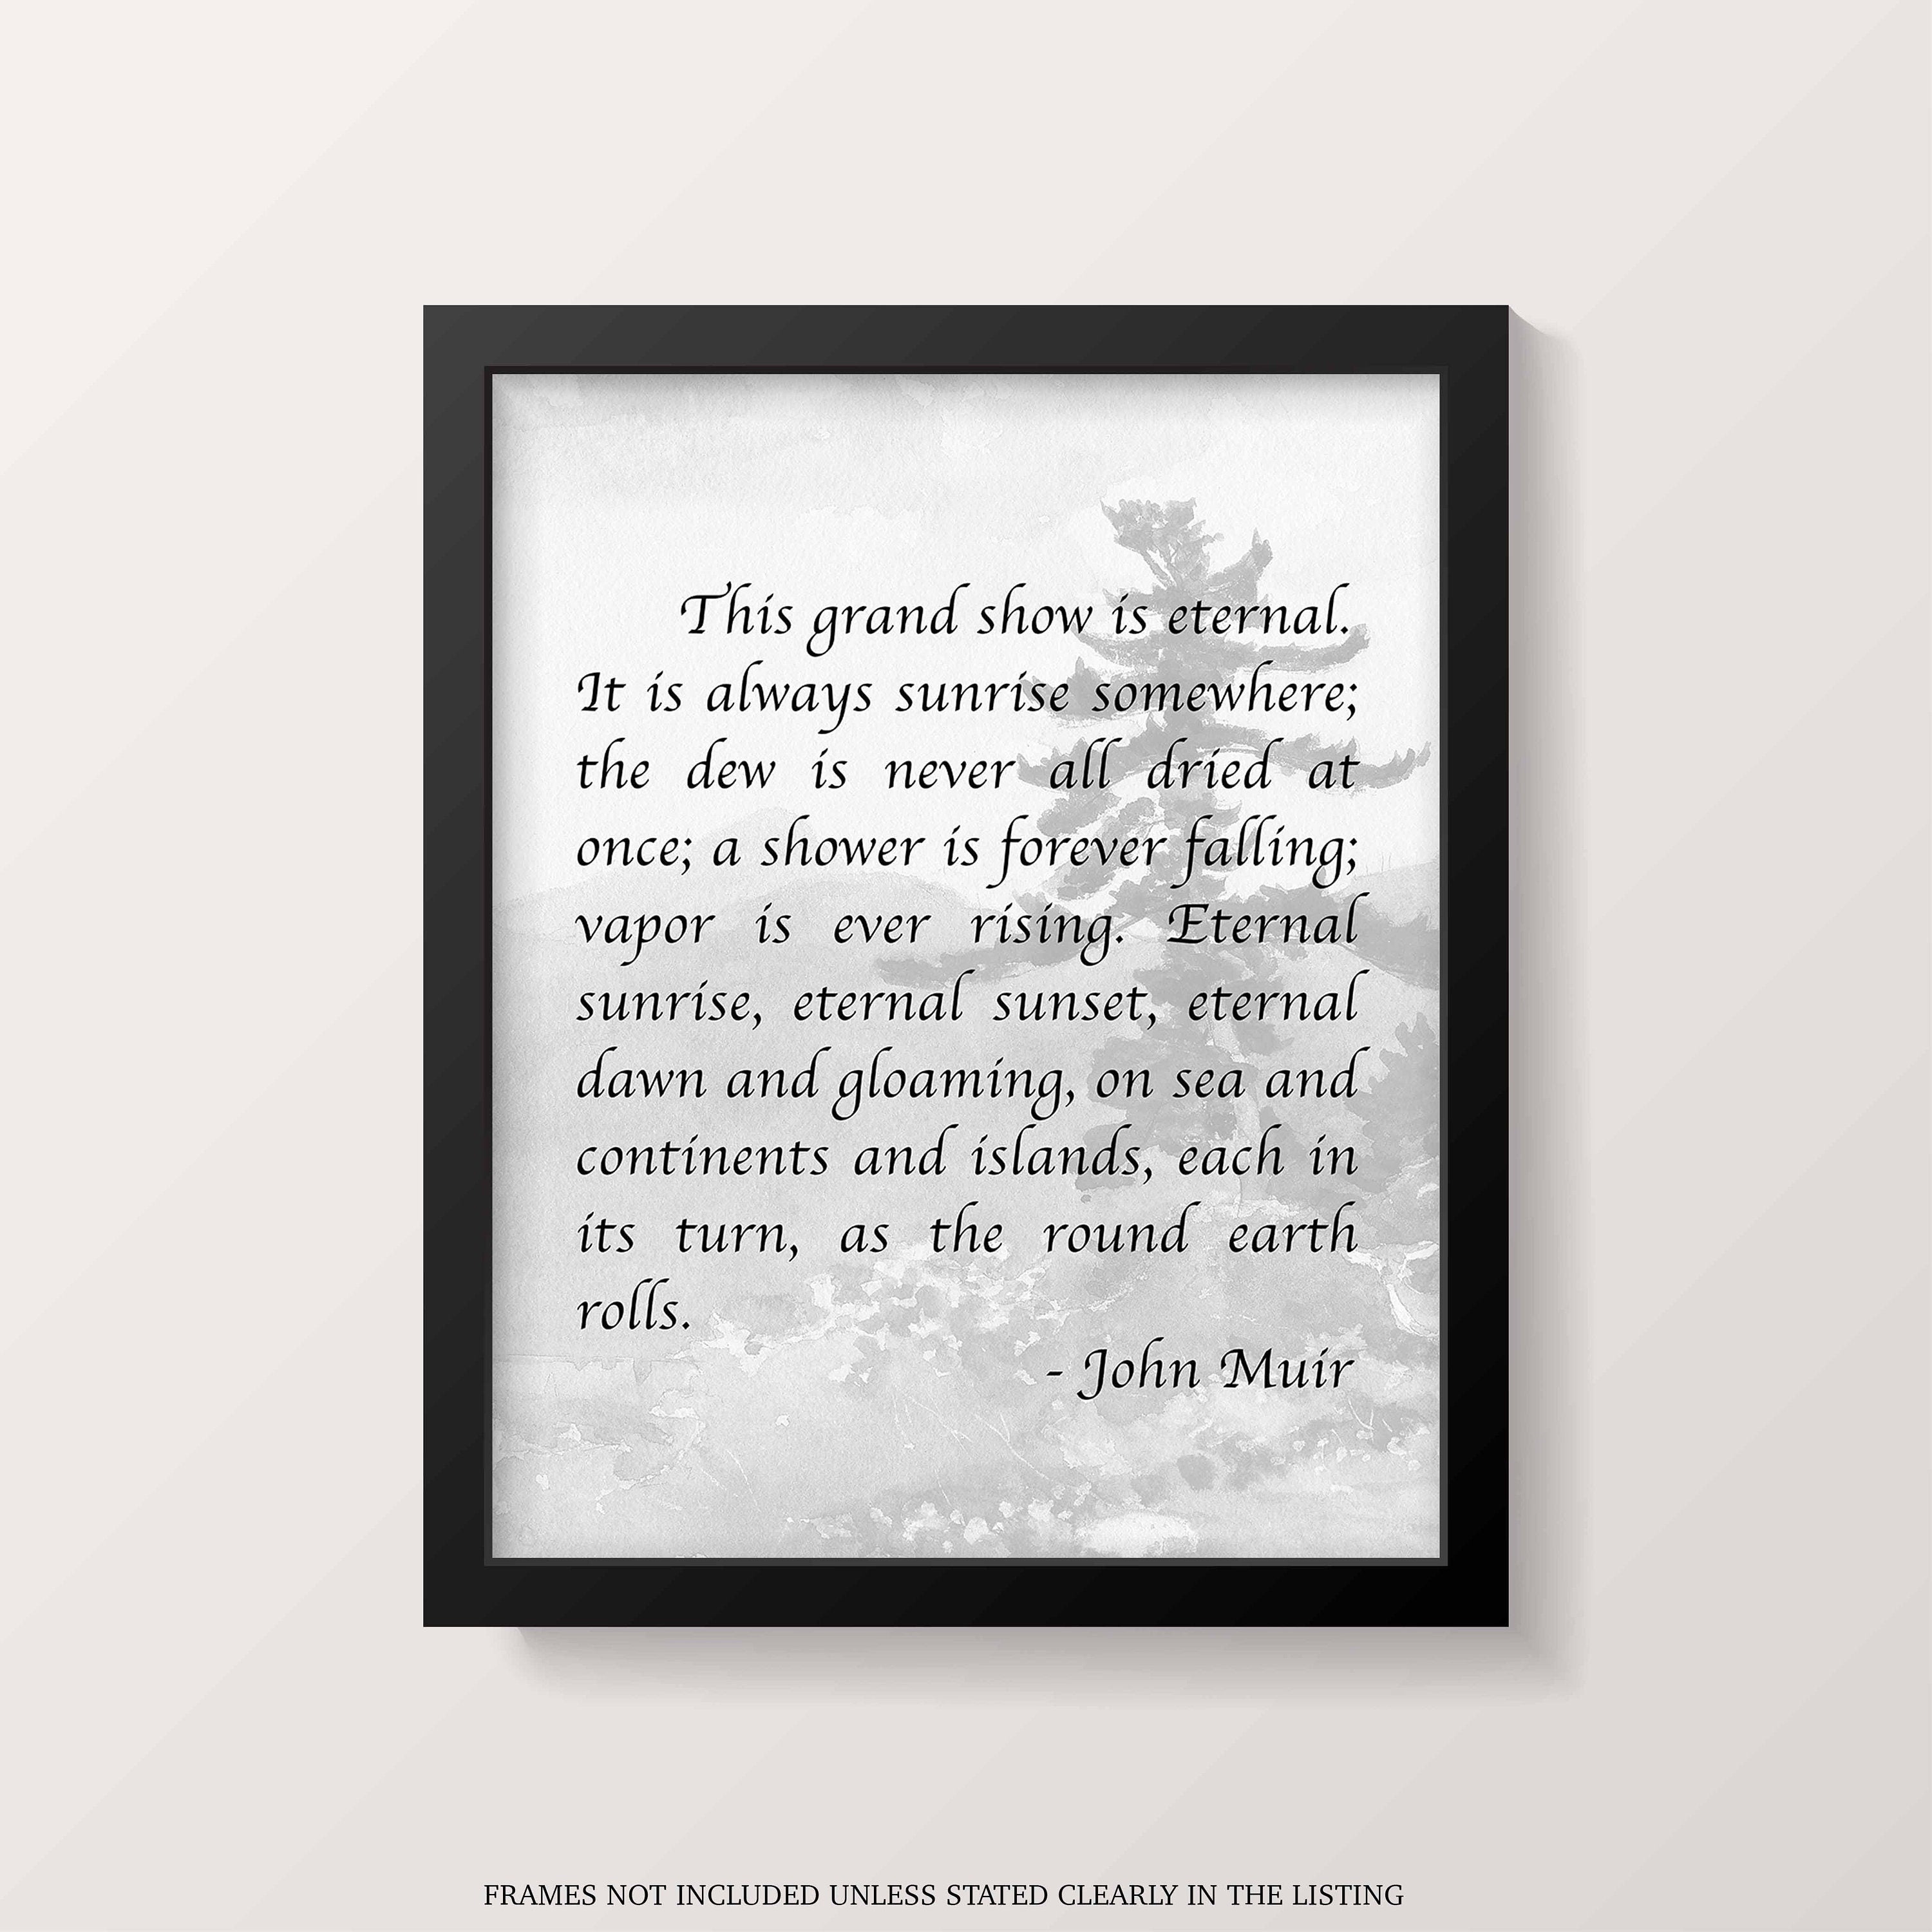 John Muir Mountains Quote Print in Colour and Black & White backgrounds, Inspirational Gift for Nature Lovers